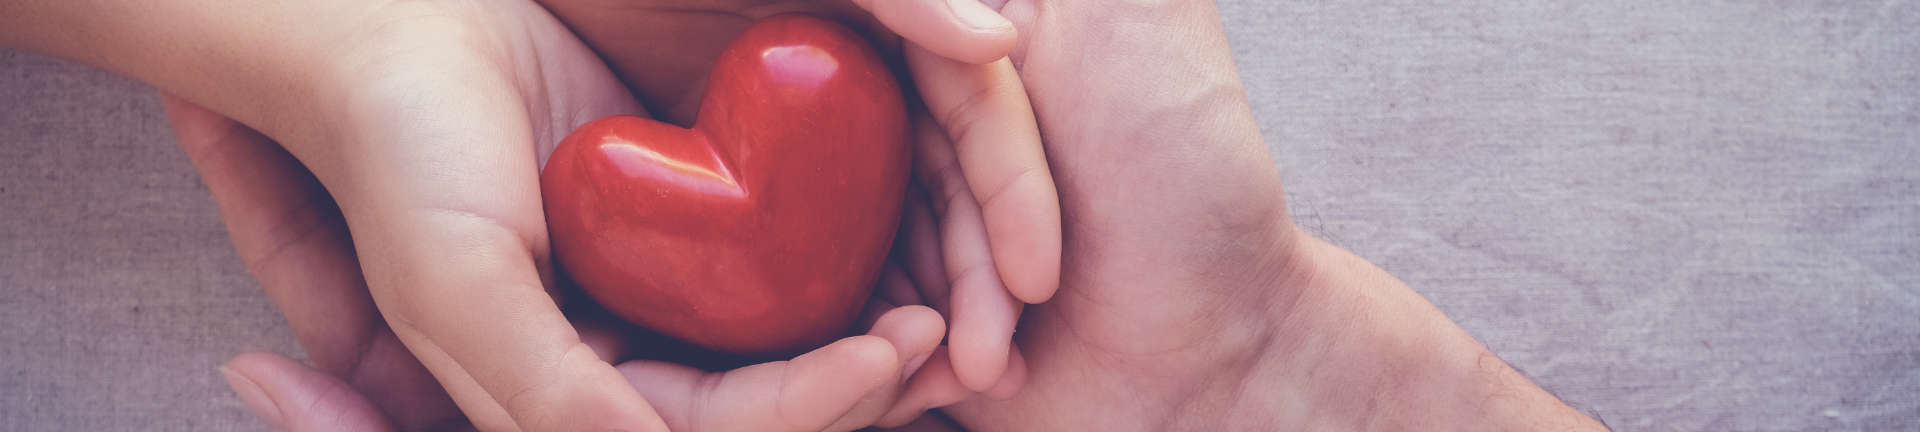 adult hands embracing hands of a child who is holding red heart